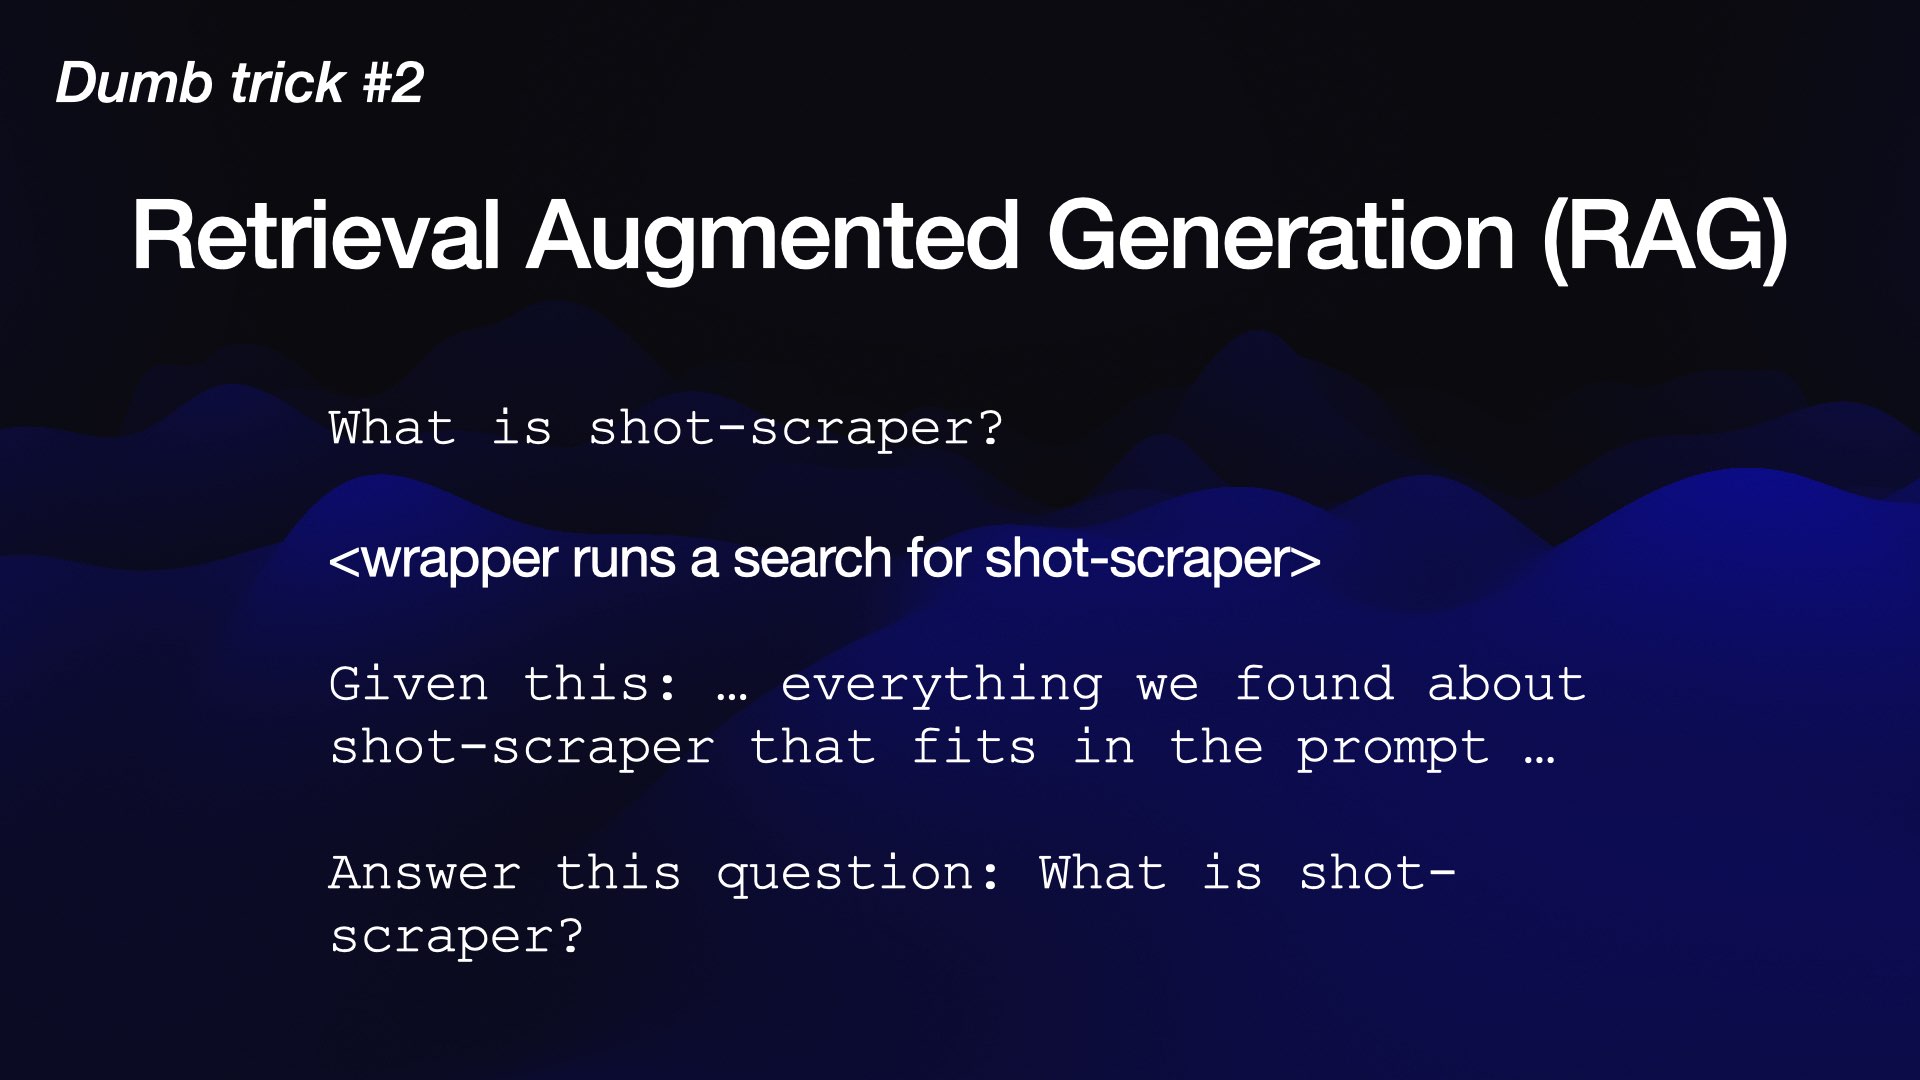 Given this: .. everything we found about shot-scraper that fits in the prompt .. Answer this question: What is shot-scraper? 